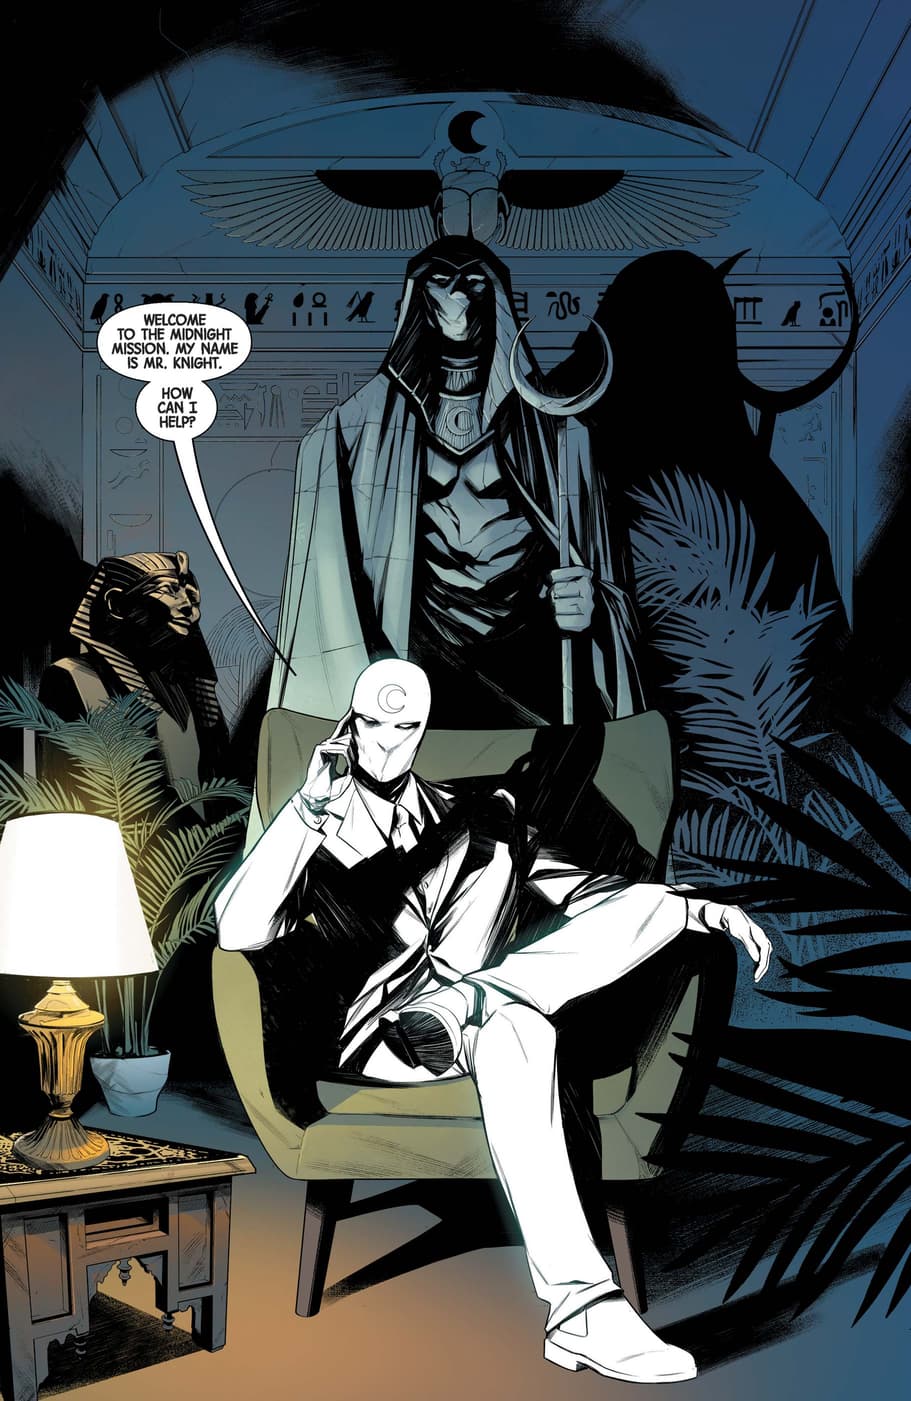 MOON KNIGHT (2021) #1 page by Jed MacKay and Alessandro Cappuccio